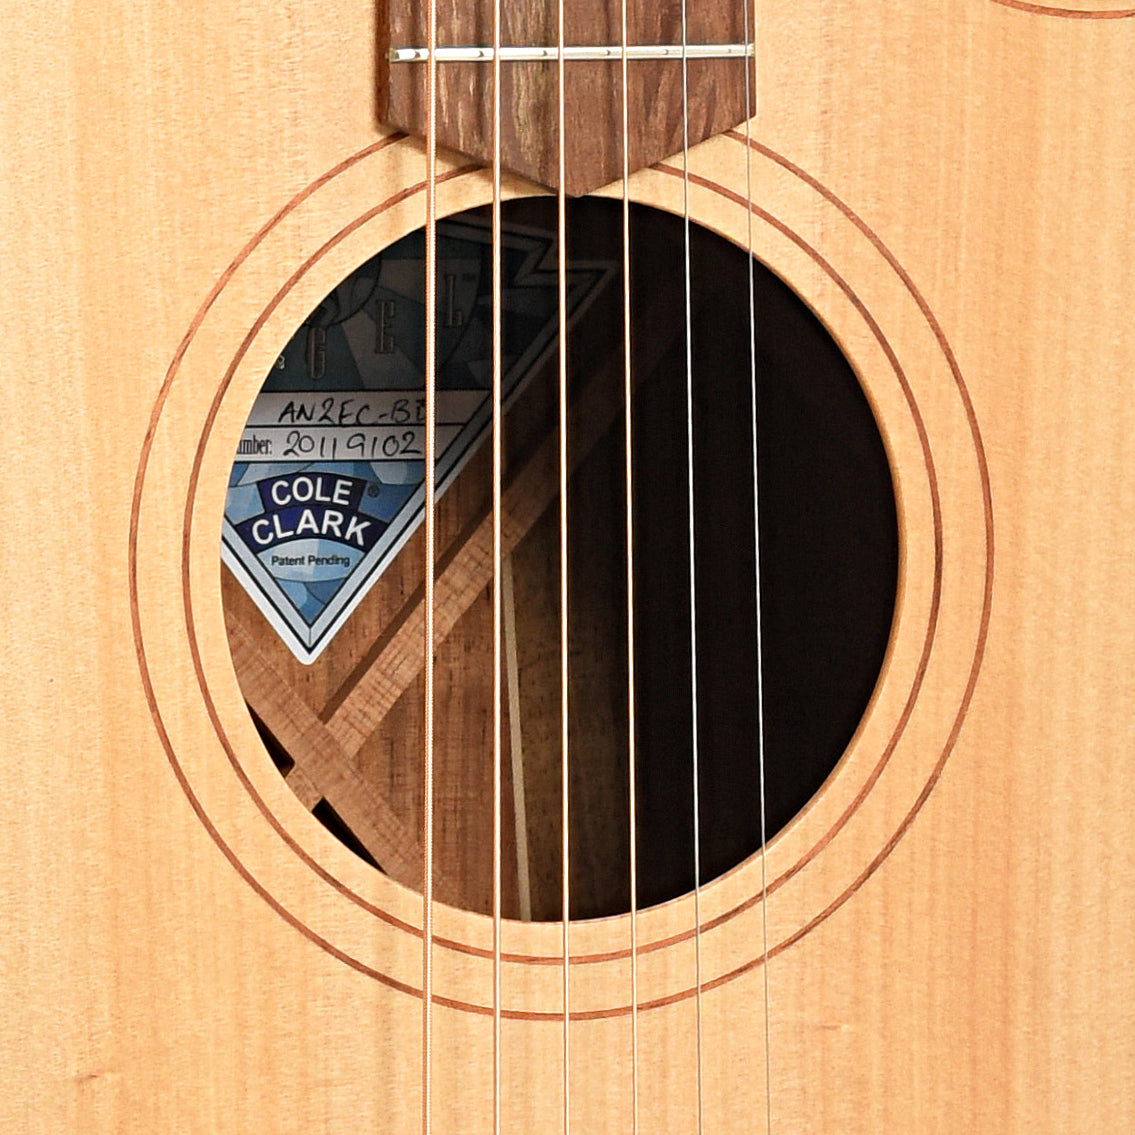 Sound hole of Cole Clark Angel AN2CE-BB Acoustic-Electric